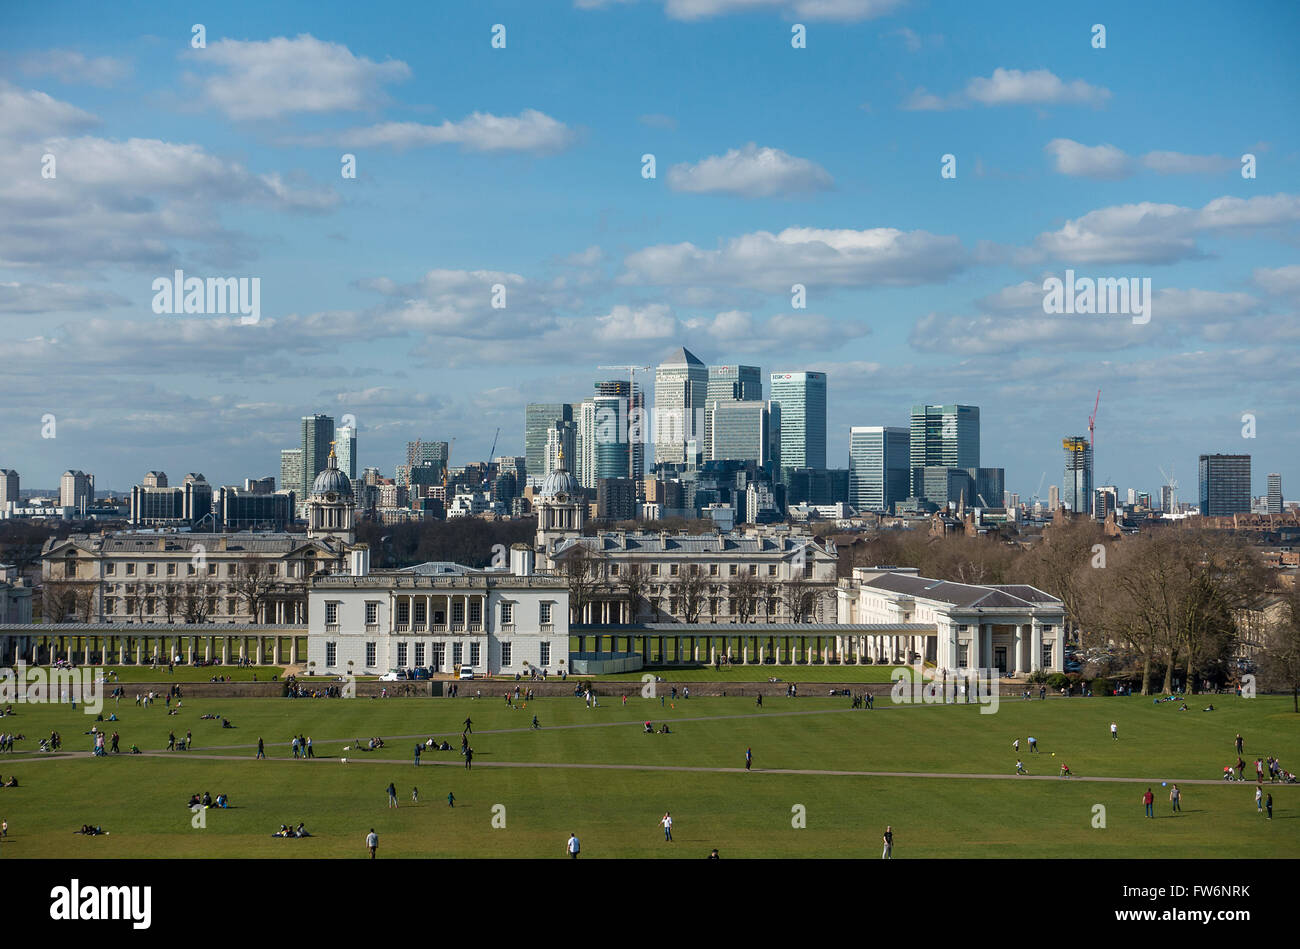 Royal navy college, Canary Whar,f, Greenwich park  from Greenwich historic Royal observatory Stock Photo